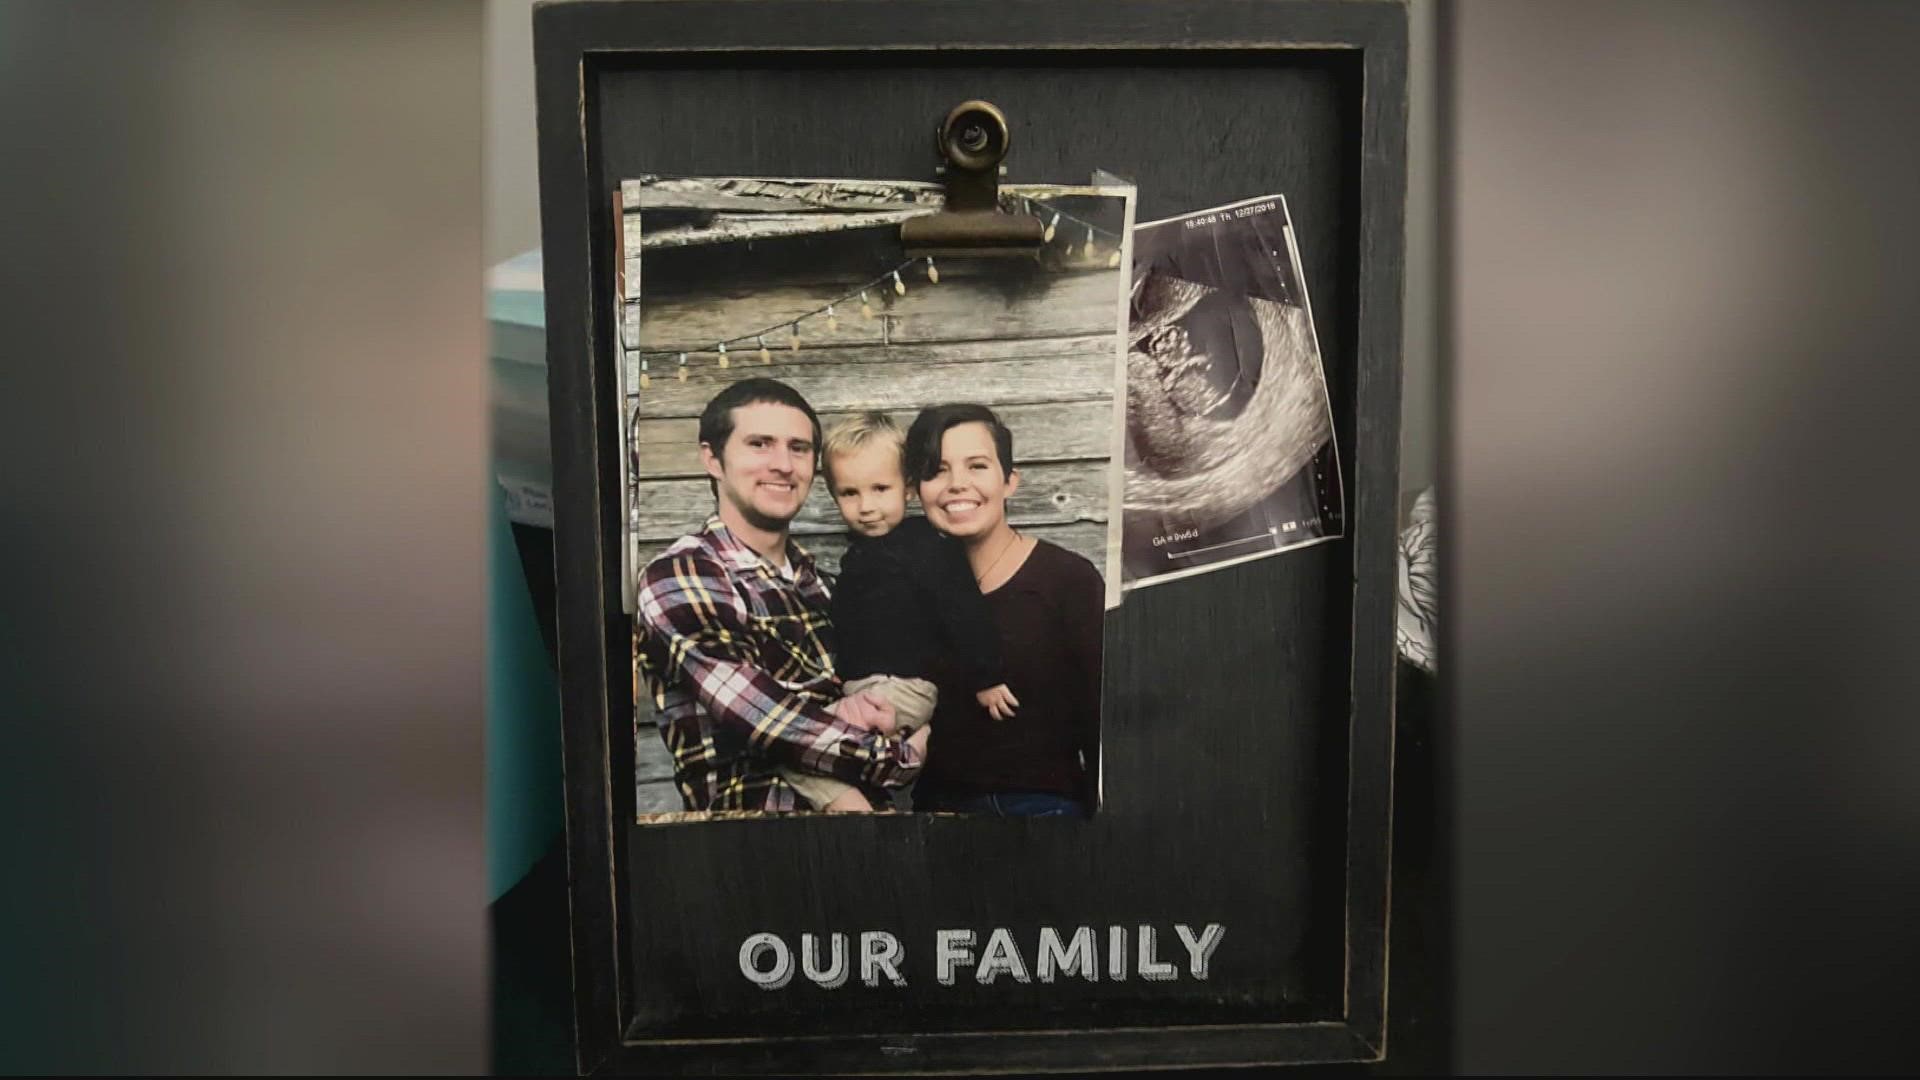 As WUSA9's Serena Marshall reports-- one woman faced a hard decision whether to terminate her pregnancy or jeopardize her health